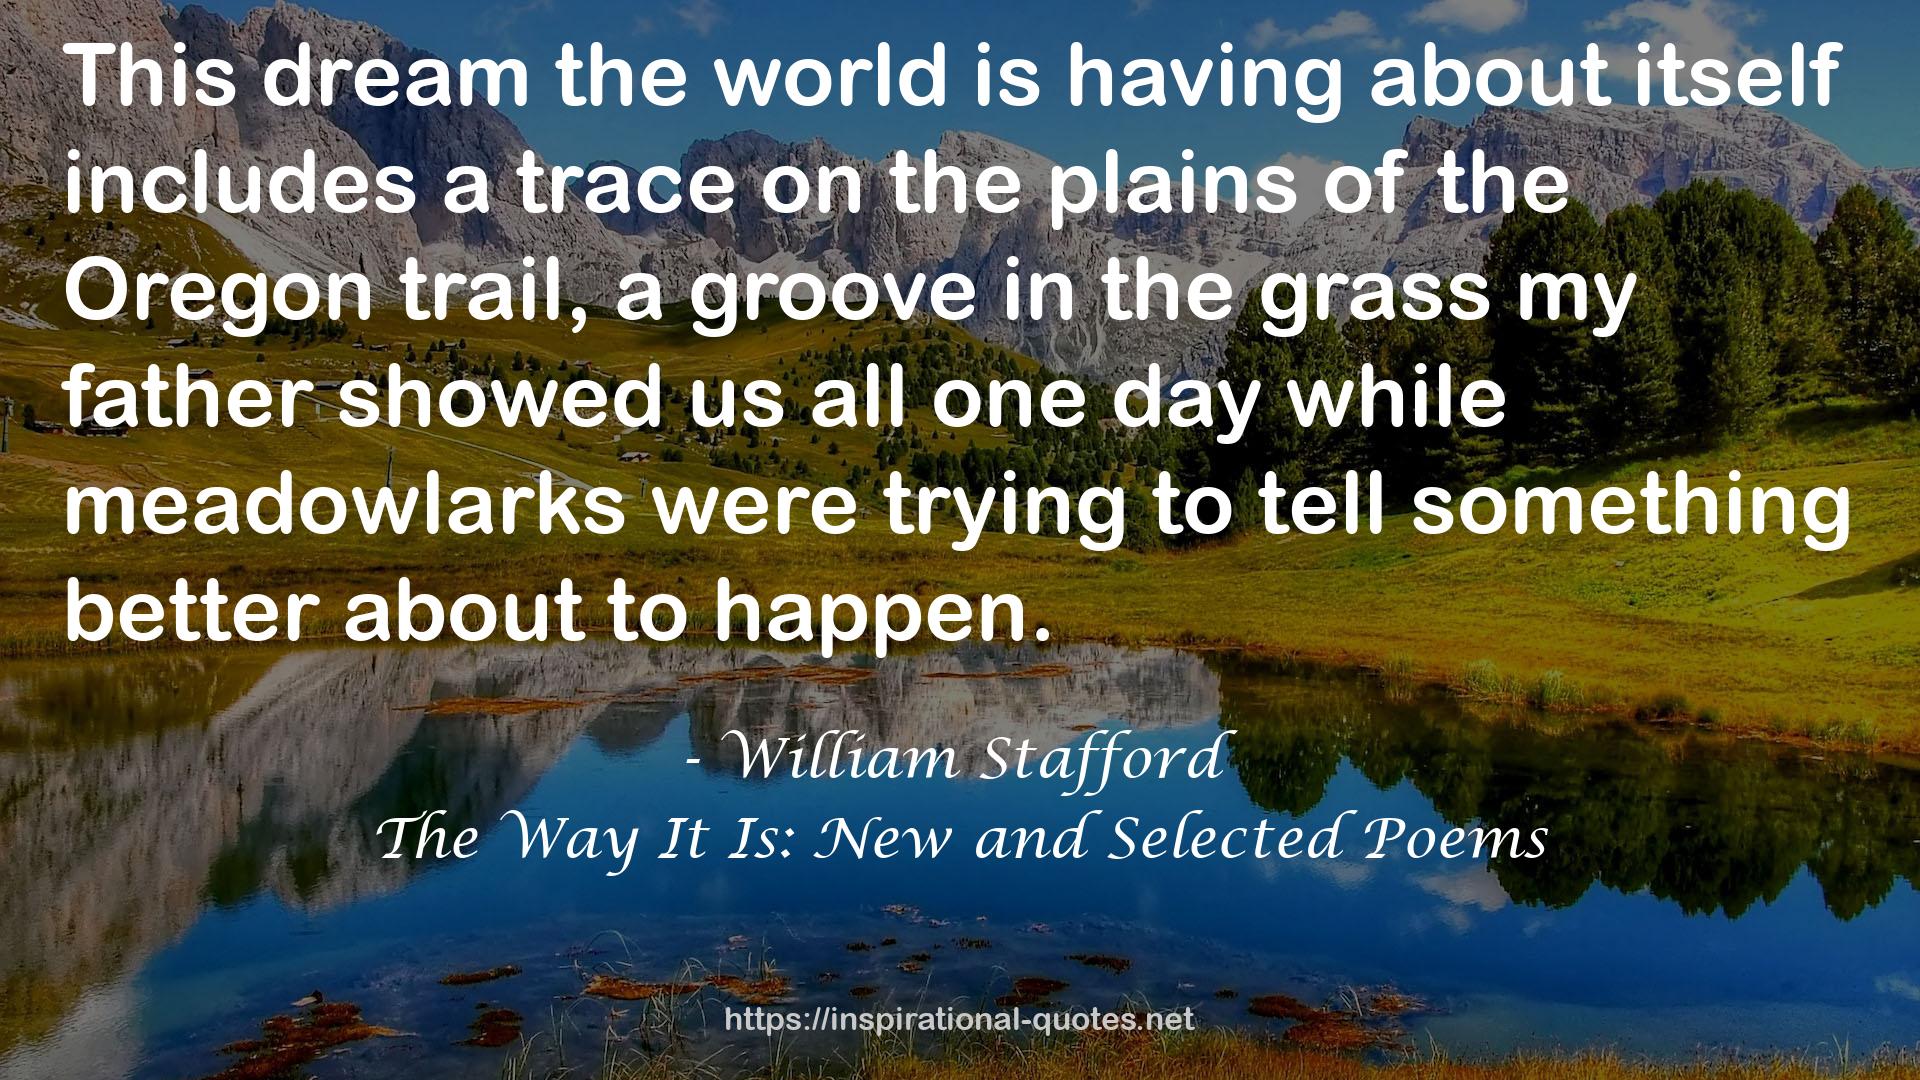 The Way It Is: New and Selected Poems QUOTES